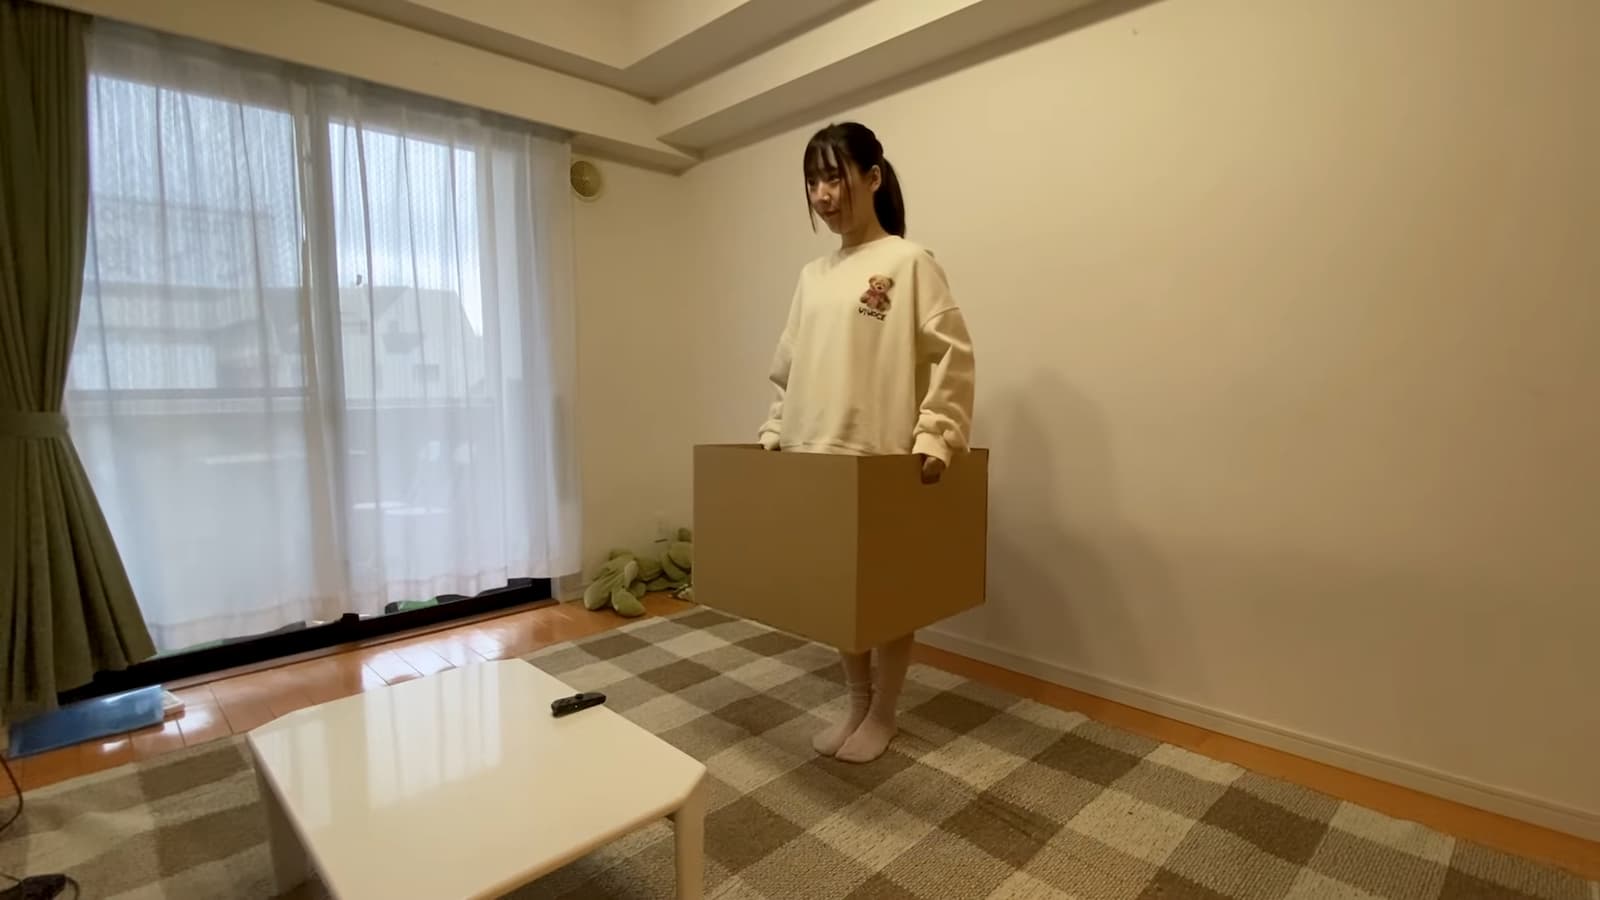 This Japanese Nintendo Switch game can be played with a cardboard box